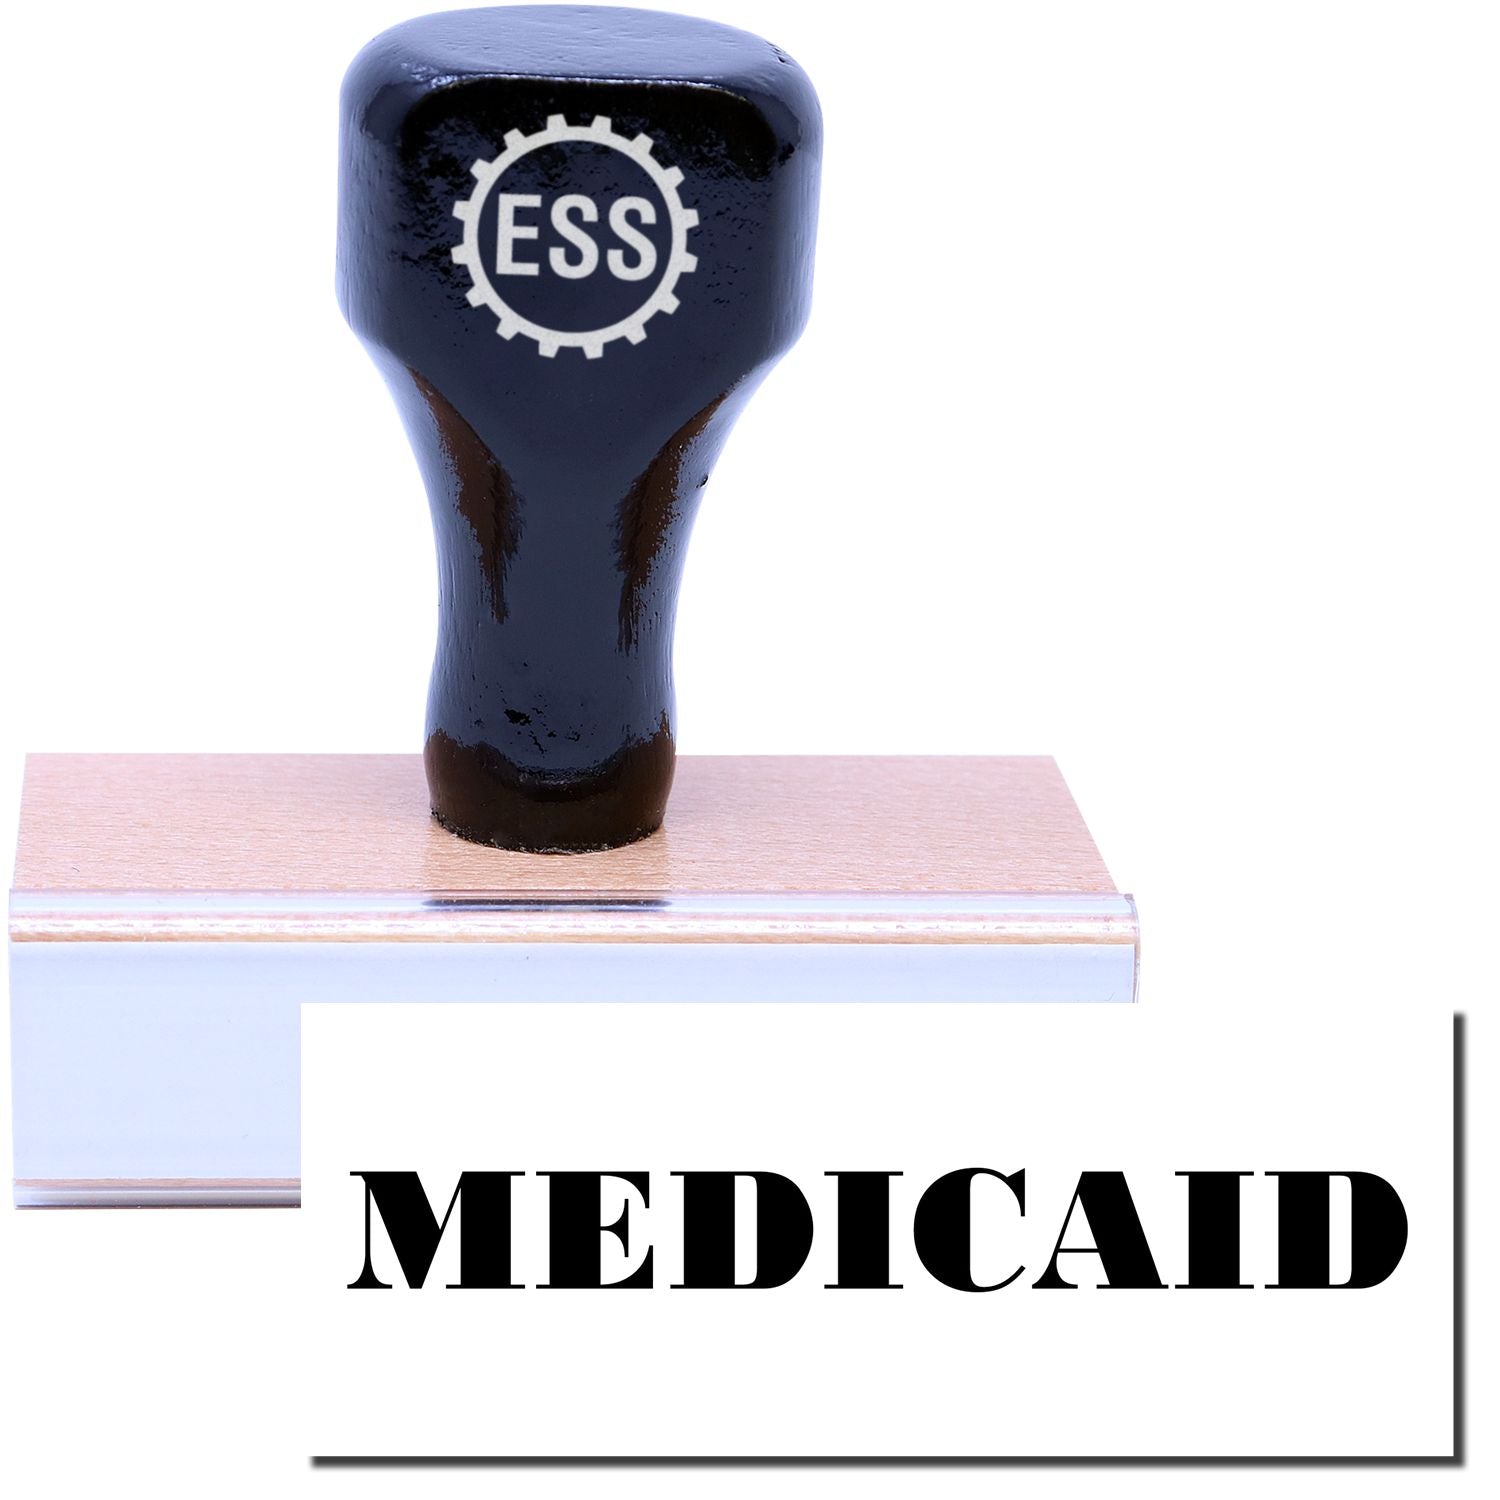 A stock office rubber stamp with a stamped image showing how the text "MEDICAID" in a large font is displayed after stamping.